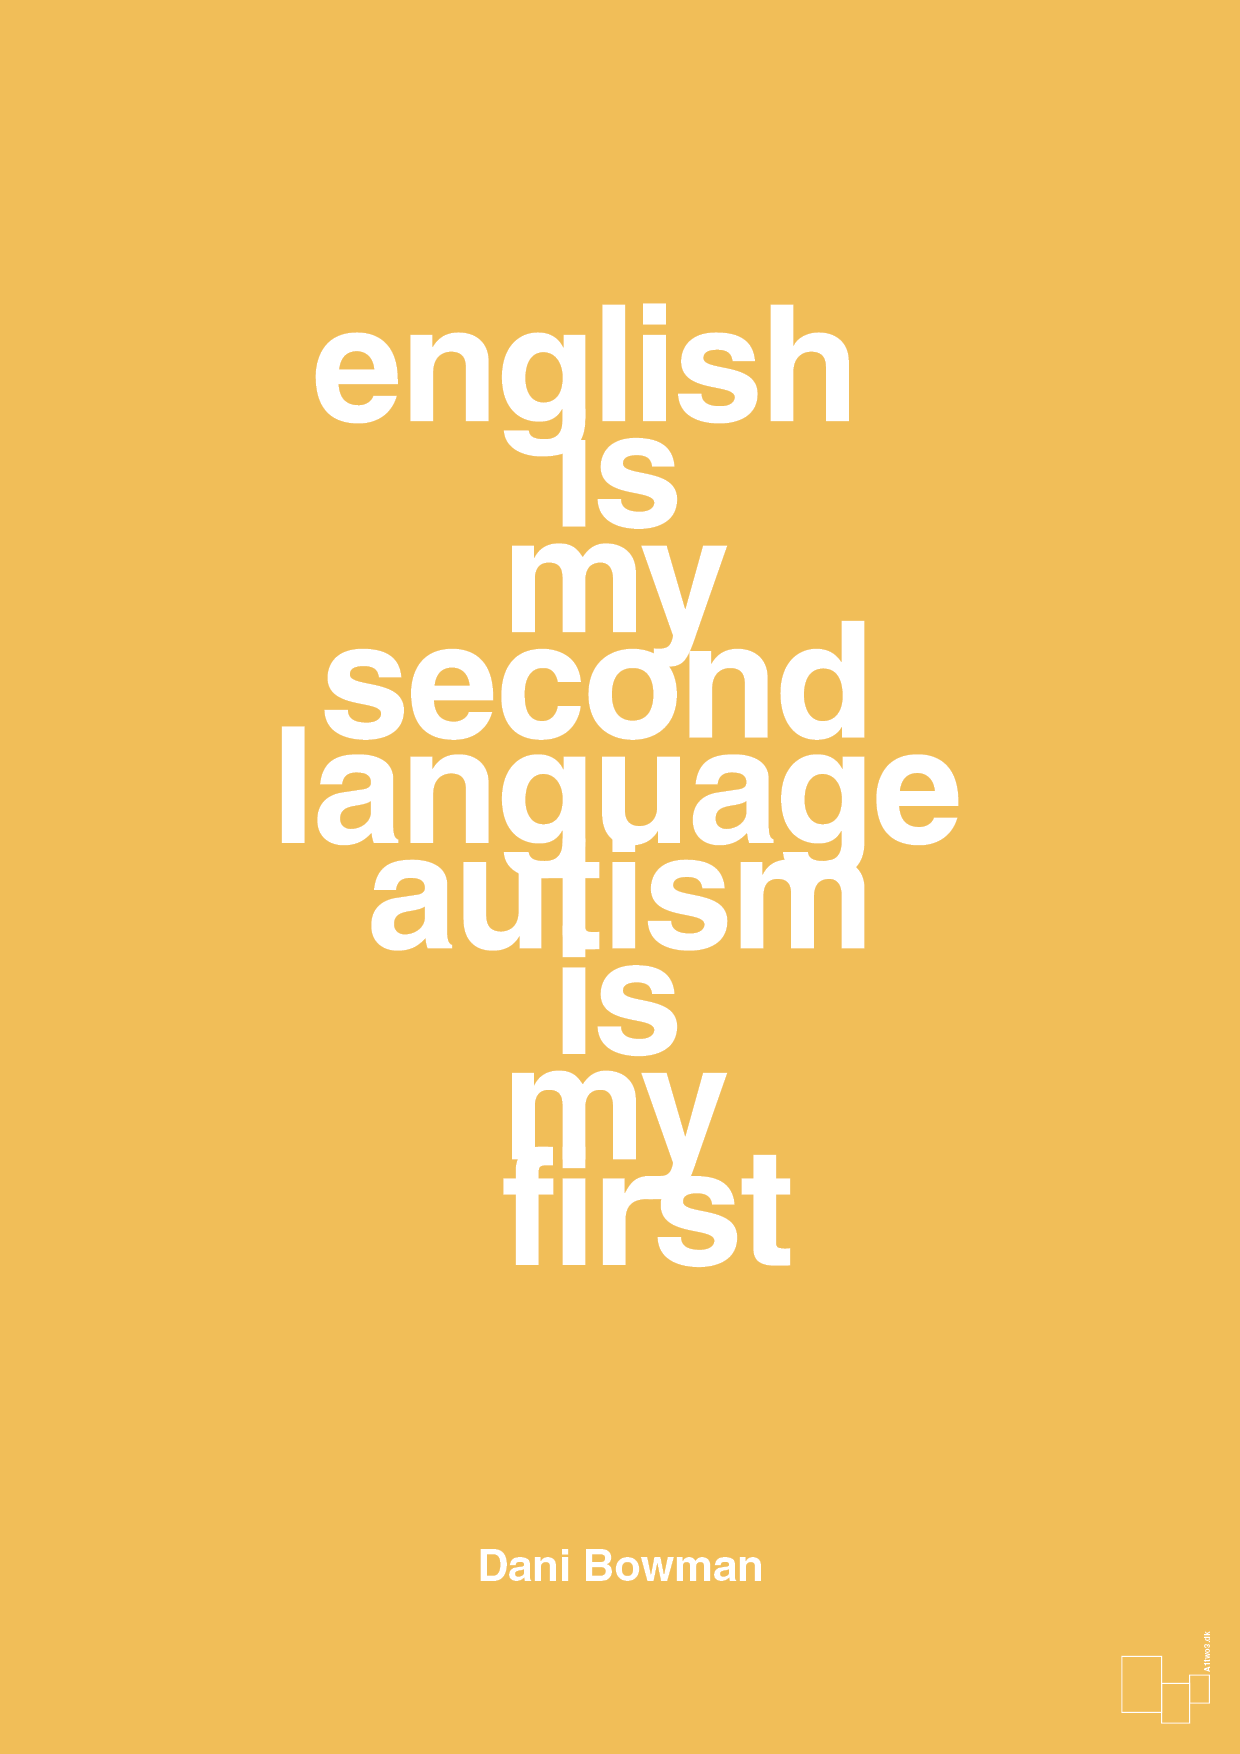 english is my second language autism is my first - Plakat med Samfund i Honeycomb